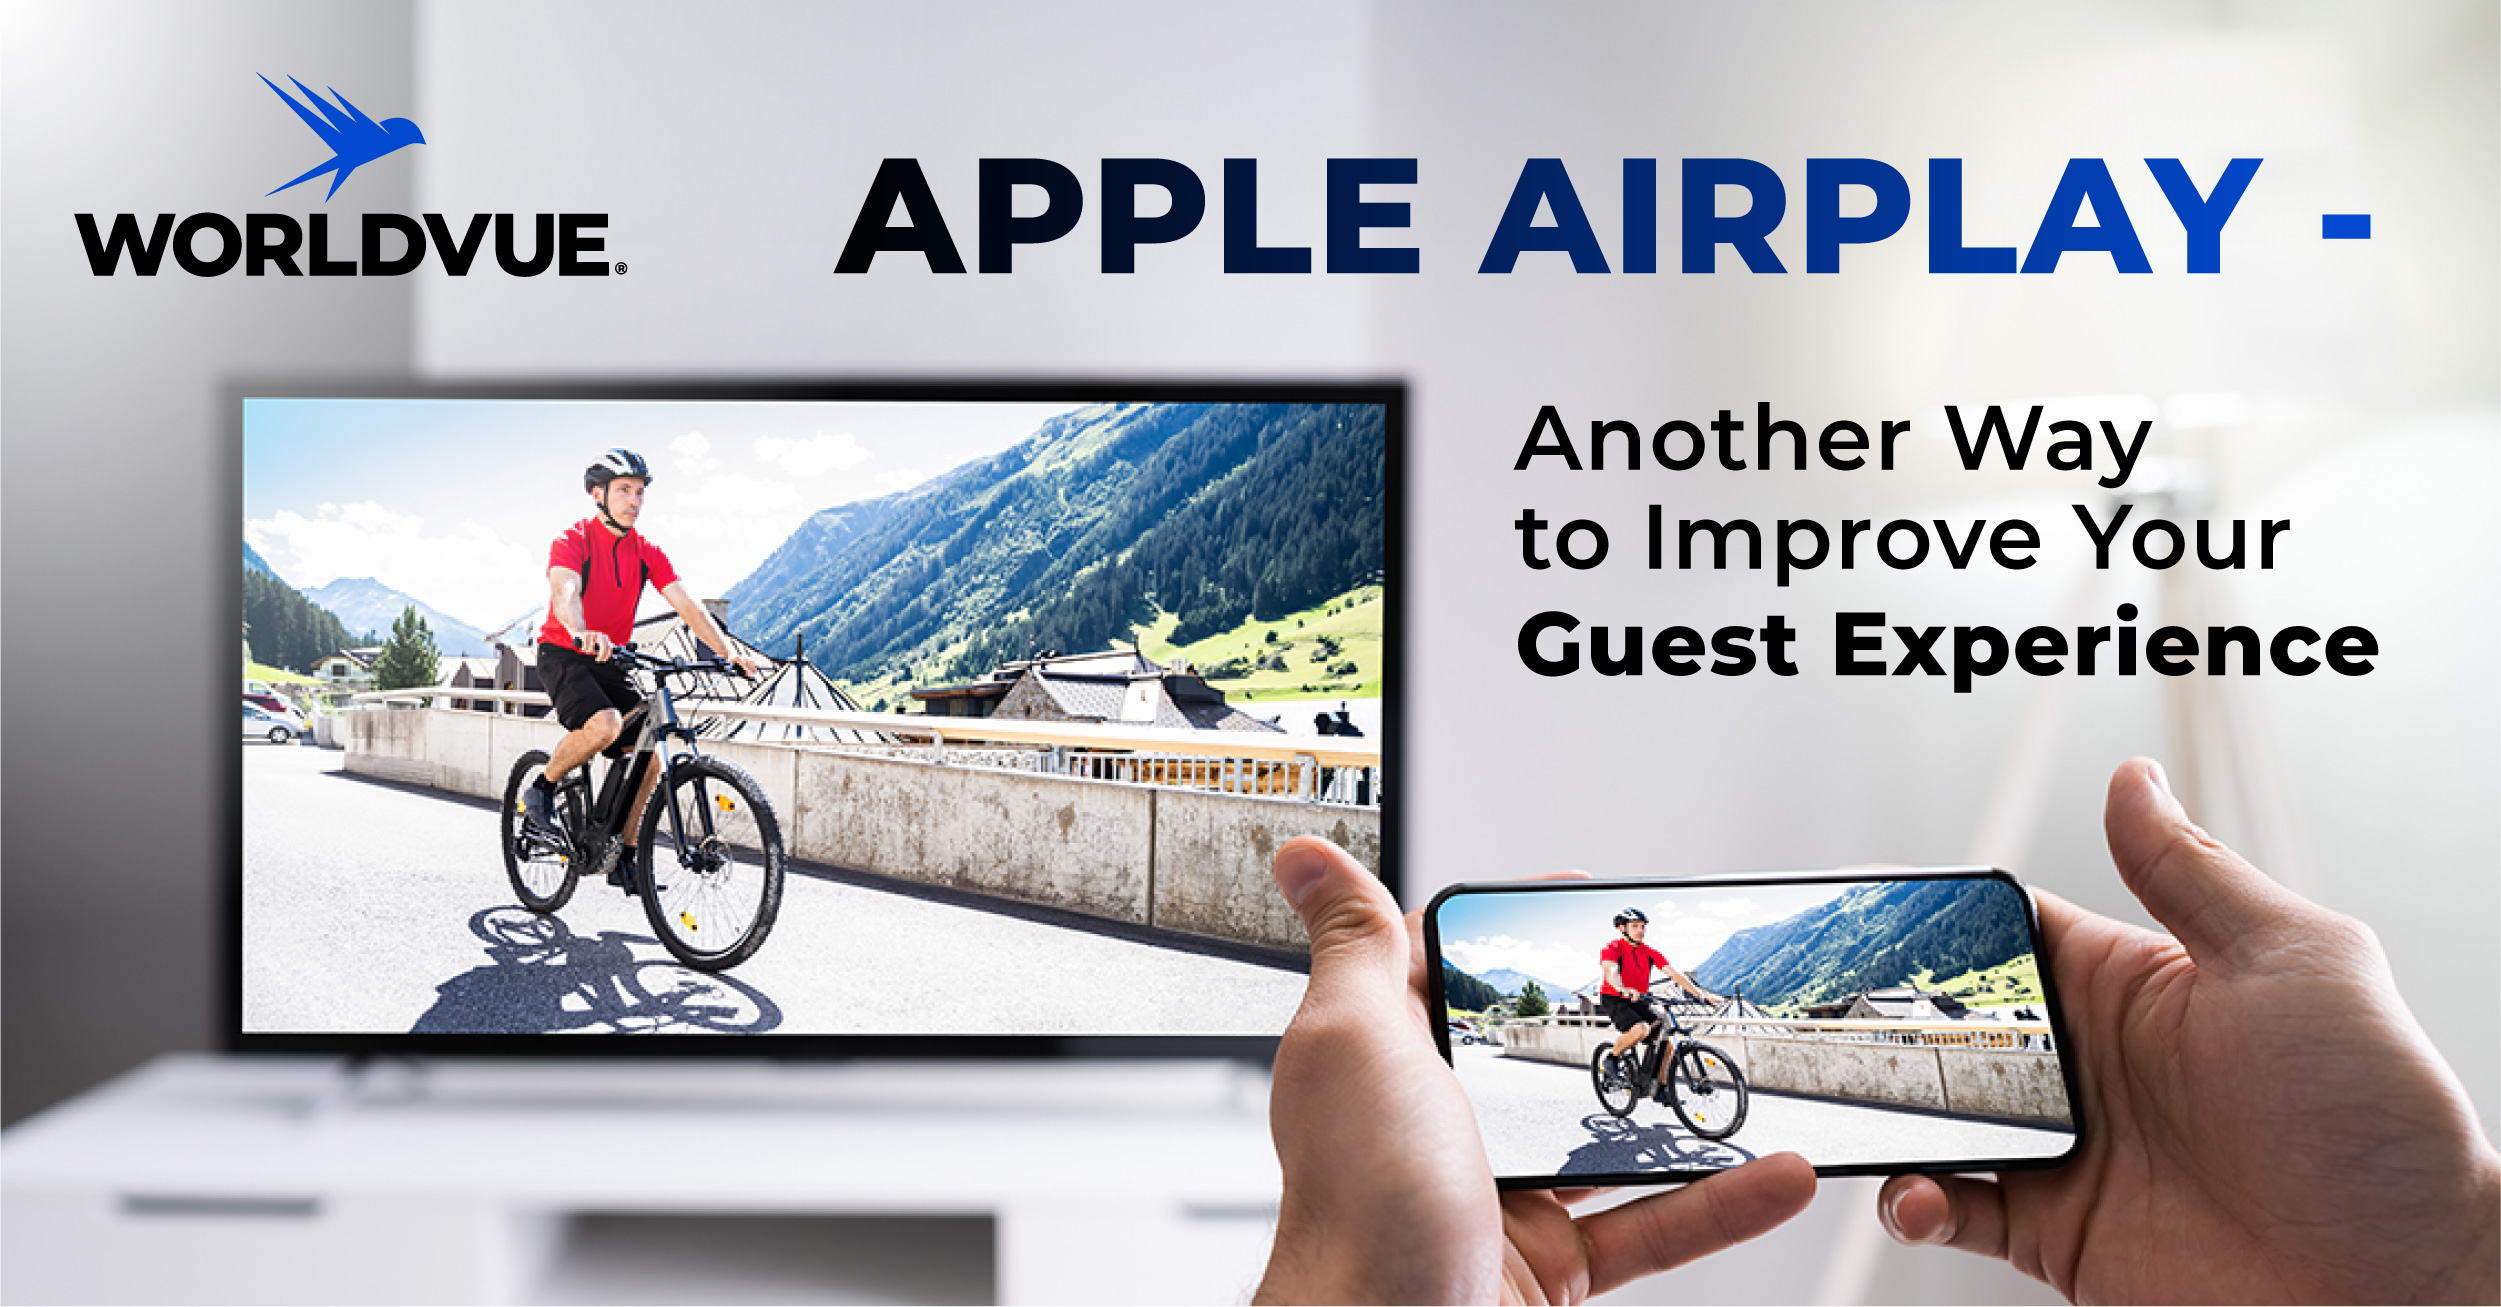 Apple Airplay: Another Way to Improve Your Guest Experience